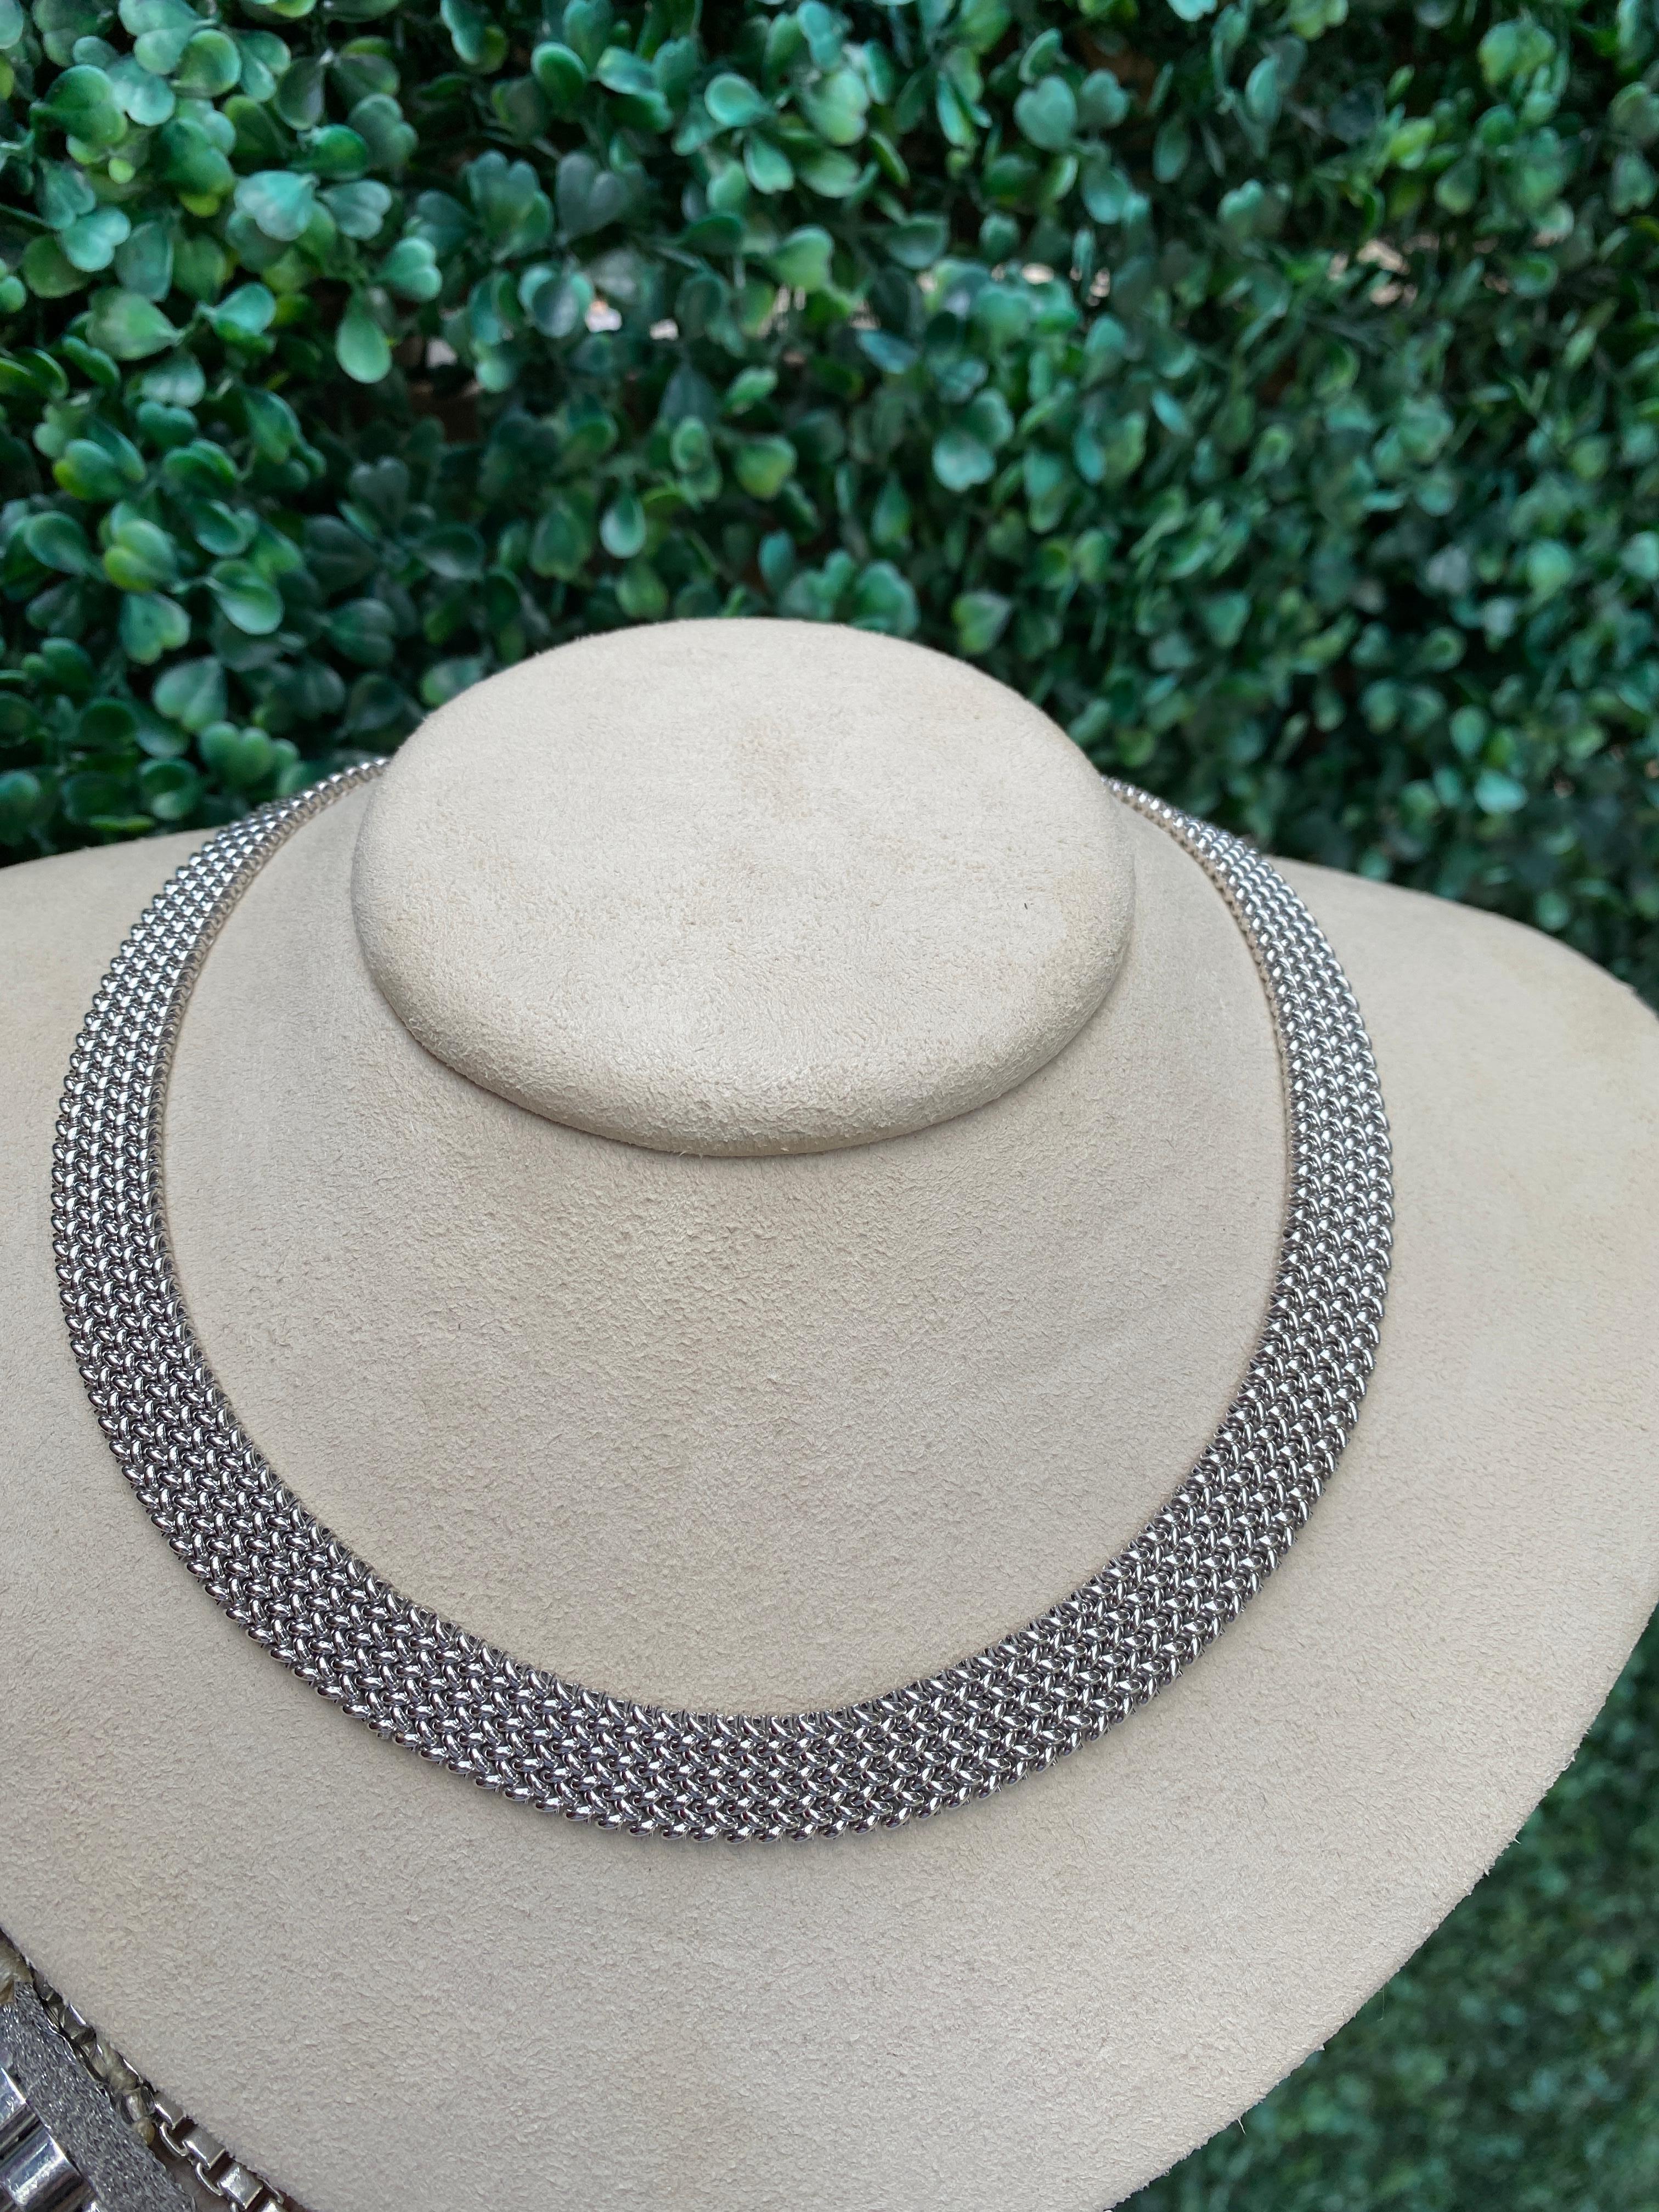 Caplain of Paris 18 Karat White Gold Woven Collar Necklace  In Excellent Condition For Sale In Houston, TX